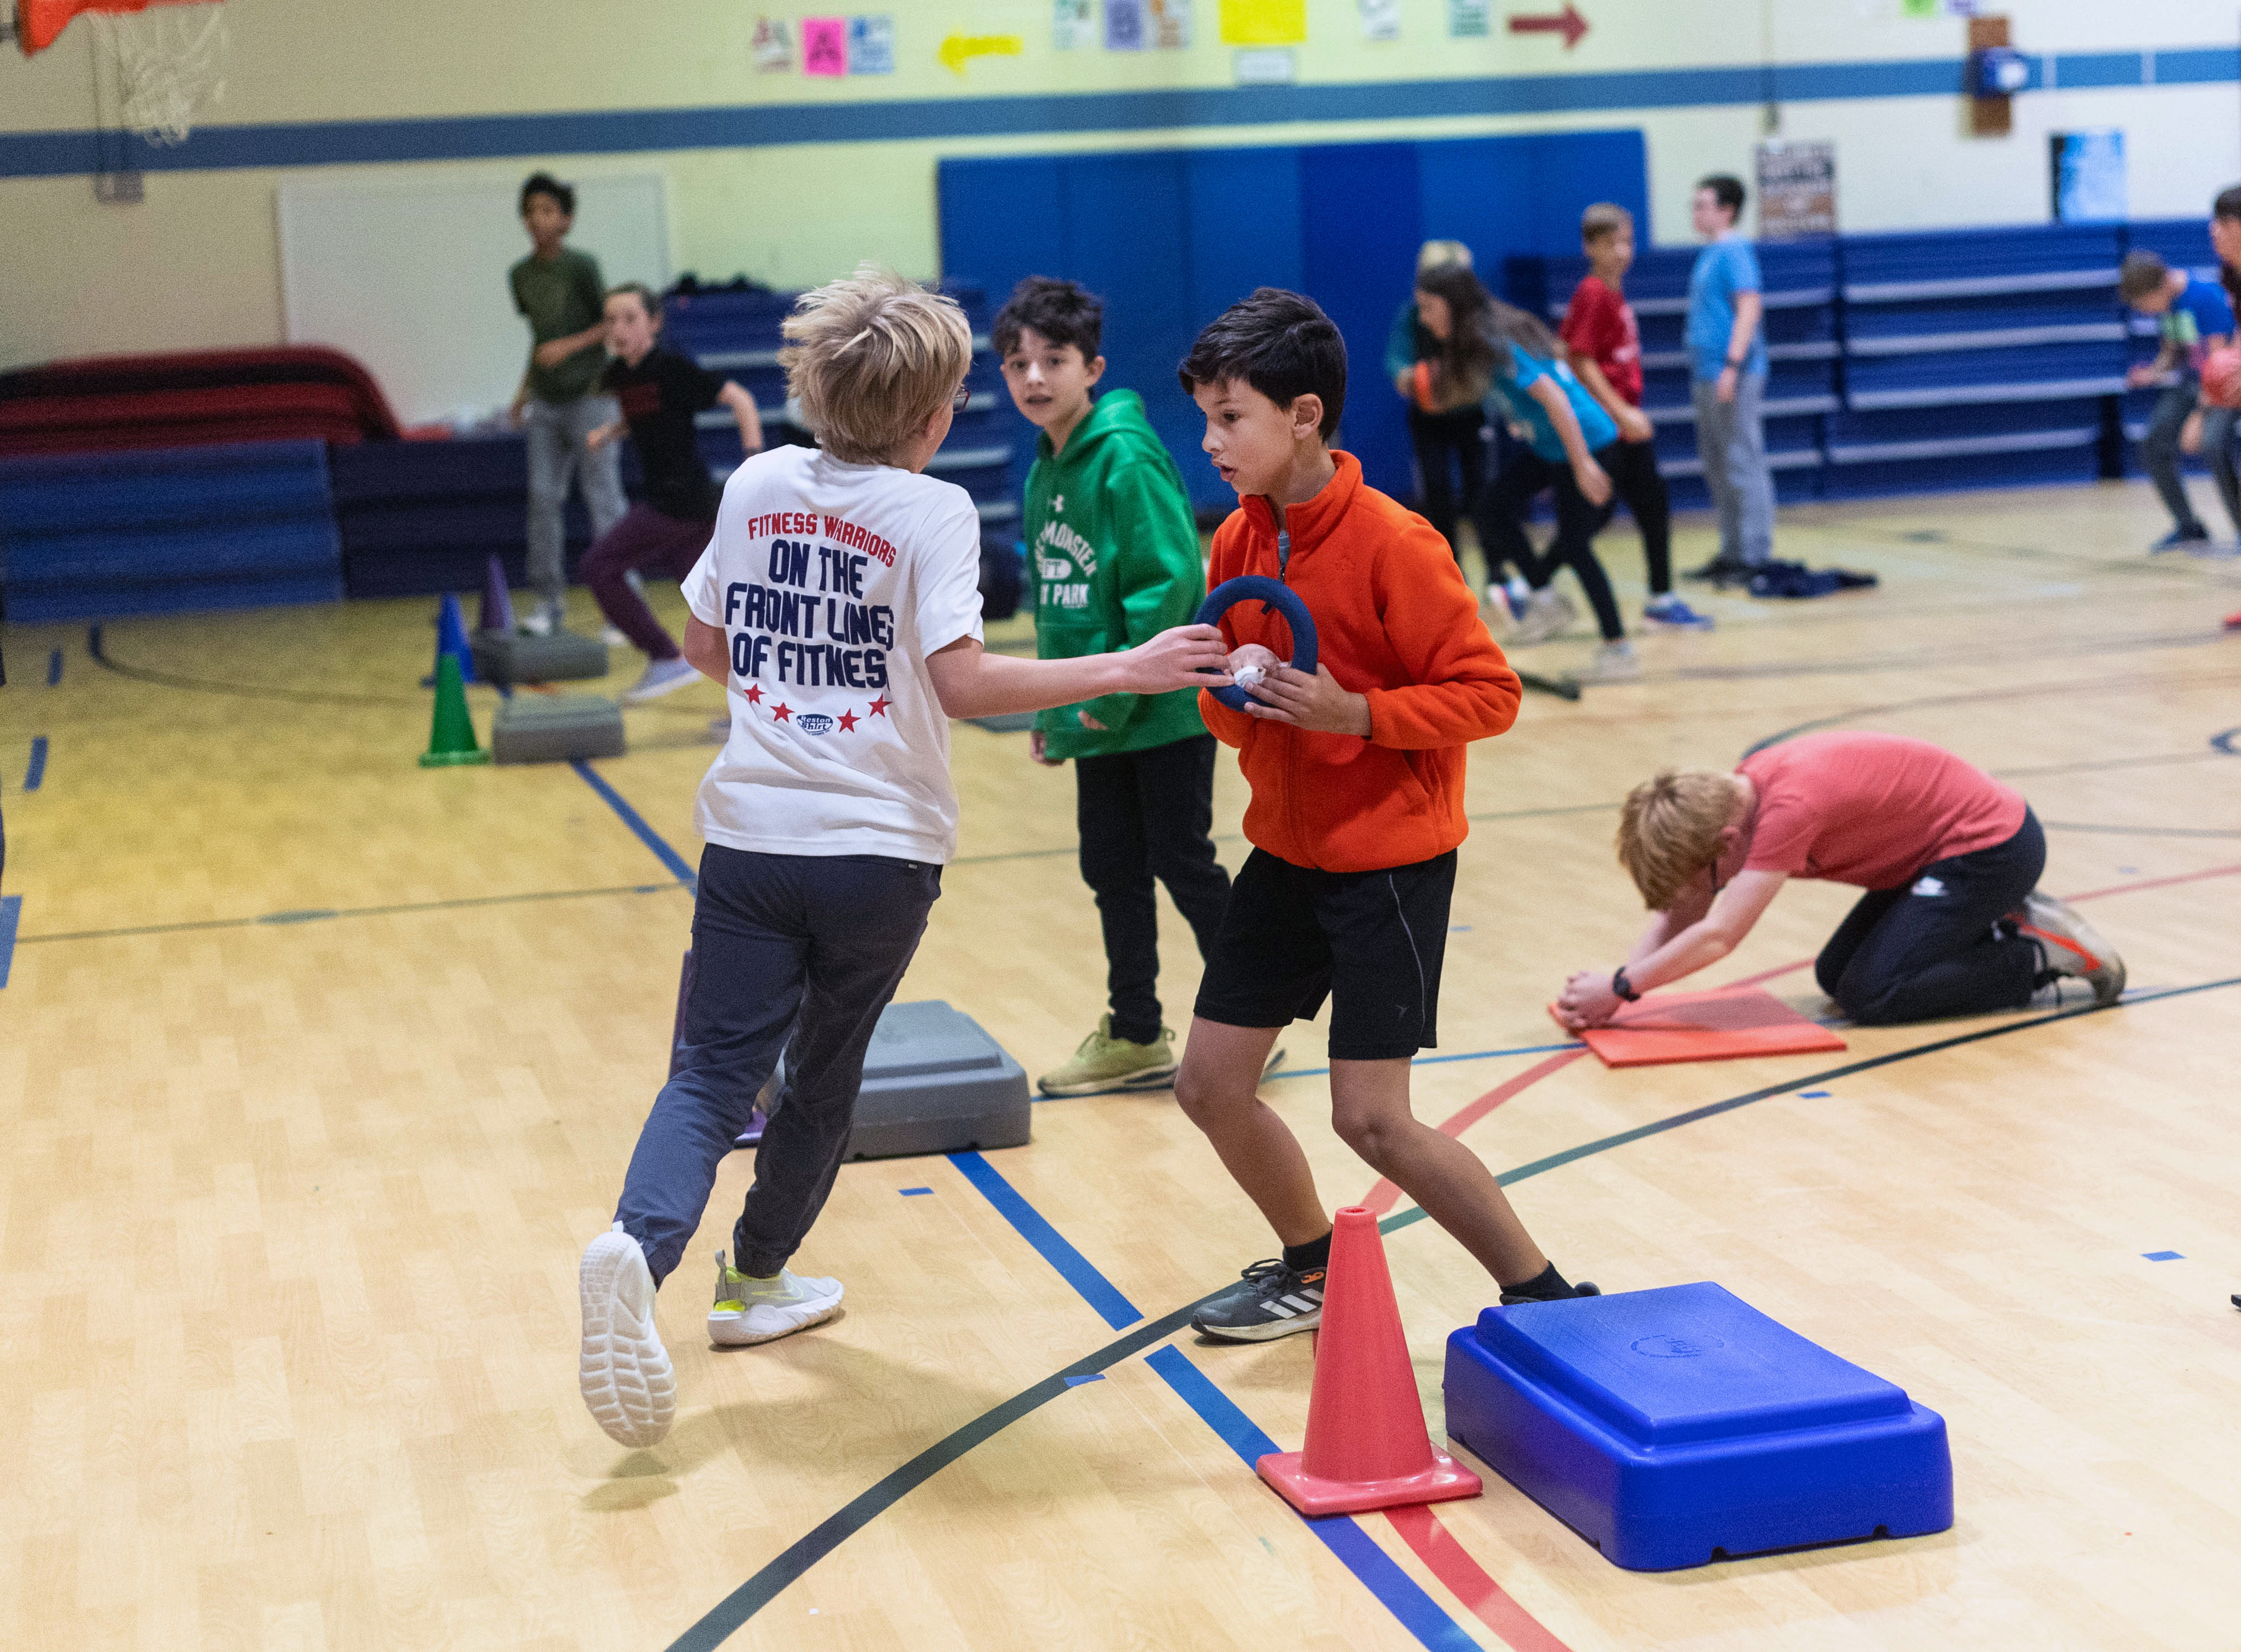 One sixth-grader passes a ring to another during a workout competition in a Fitness Warriors class.